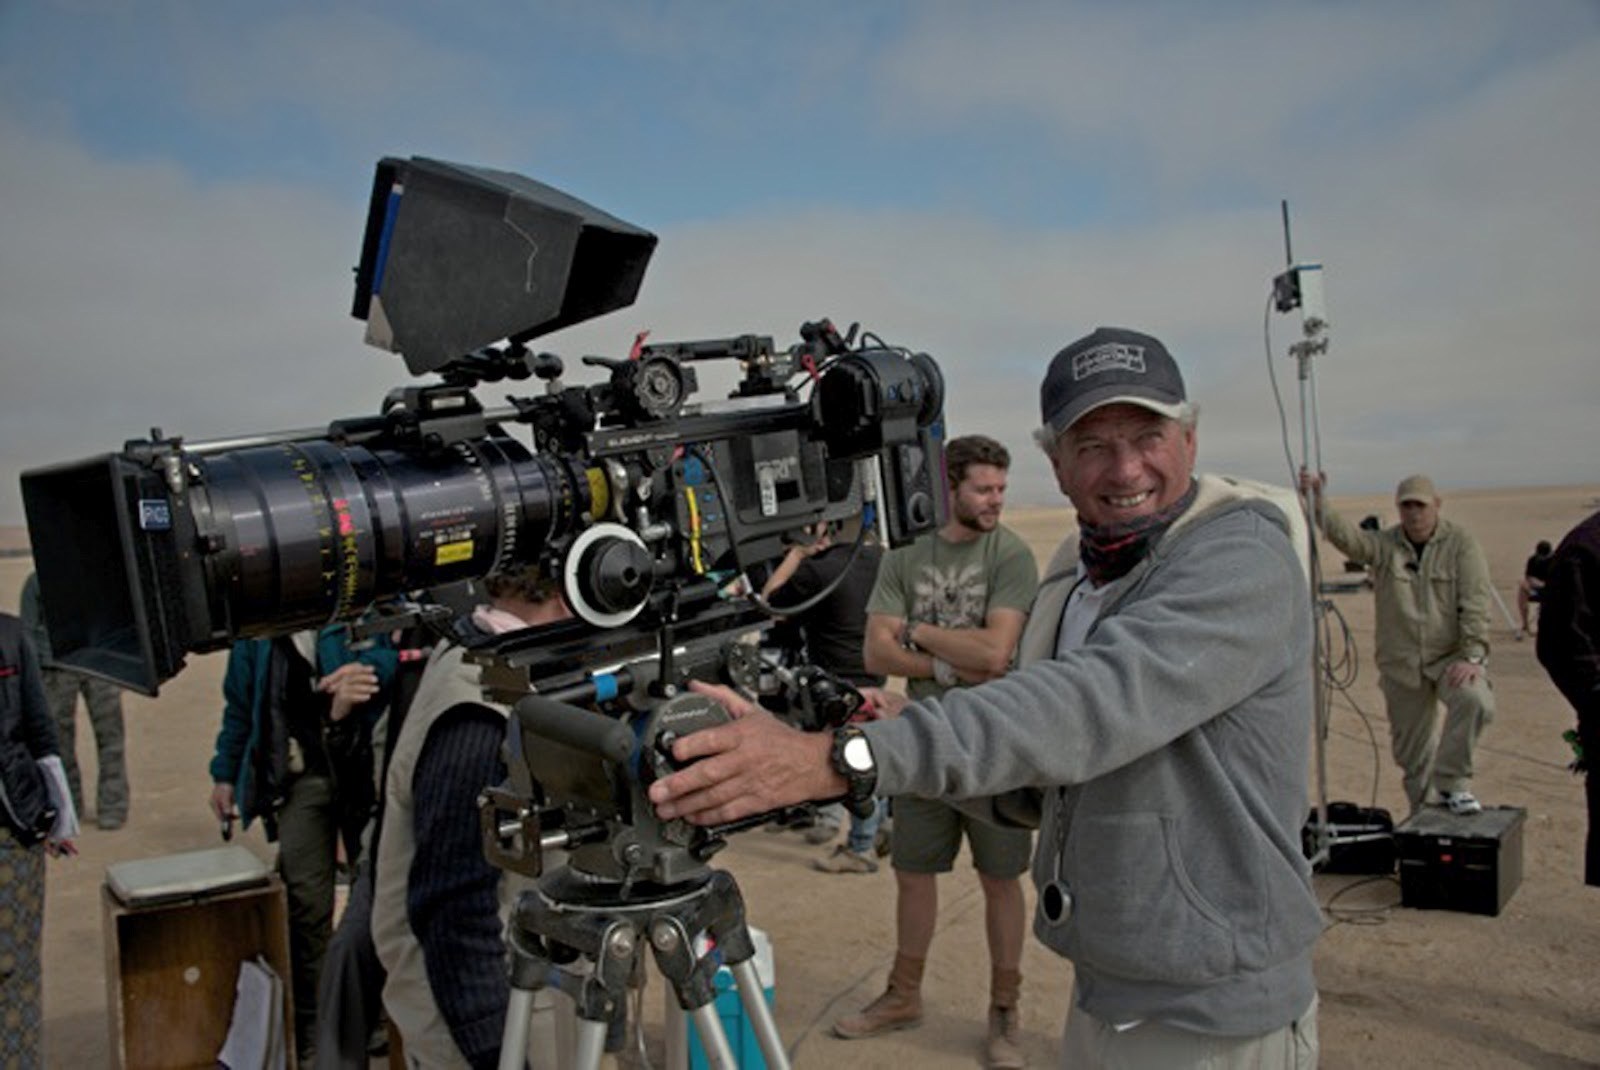 On Location – Mad Max: Fury Road (2015) Behind the Scenes